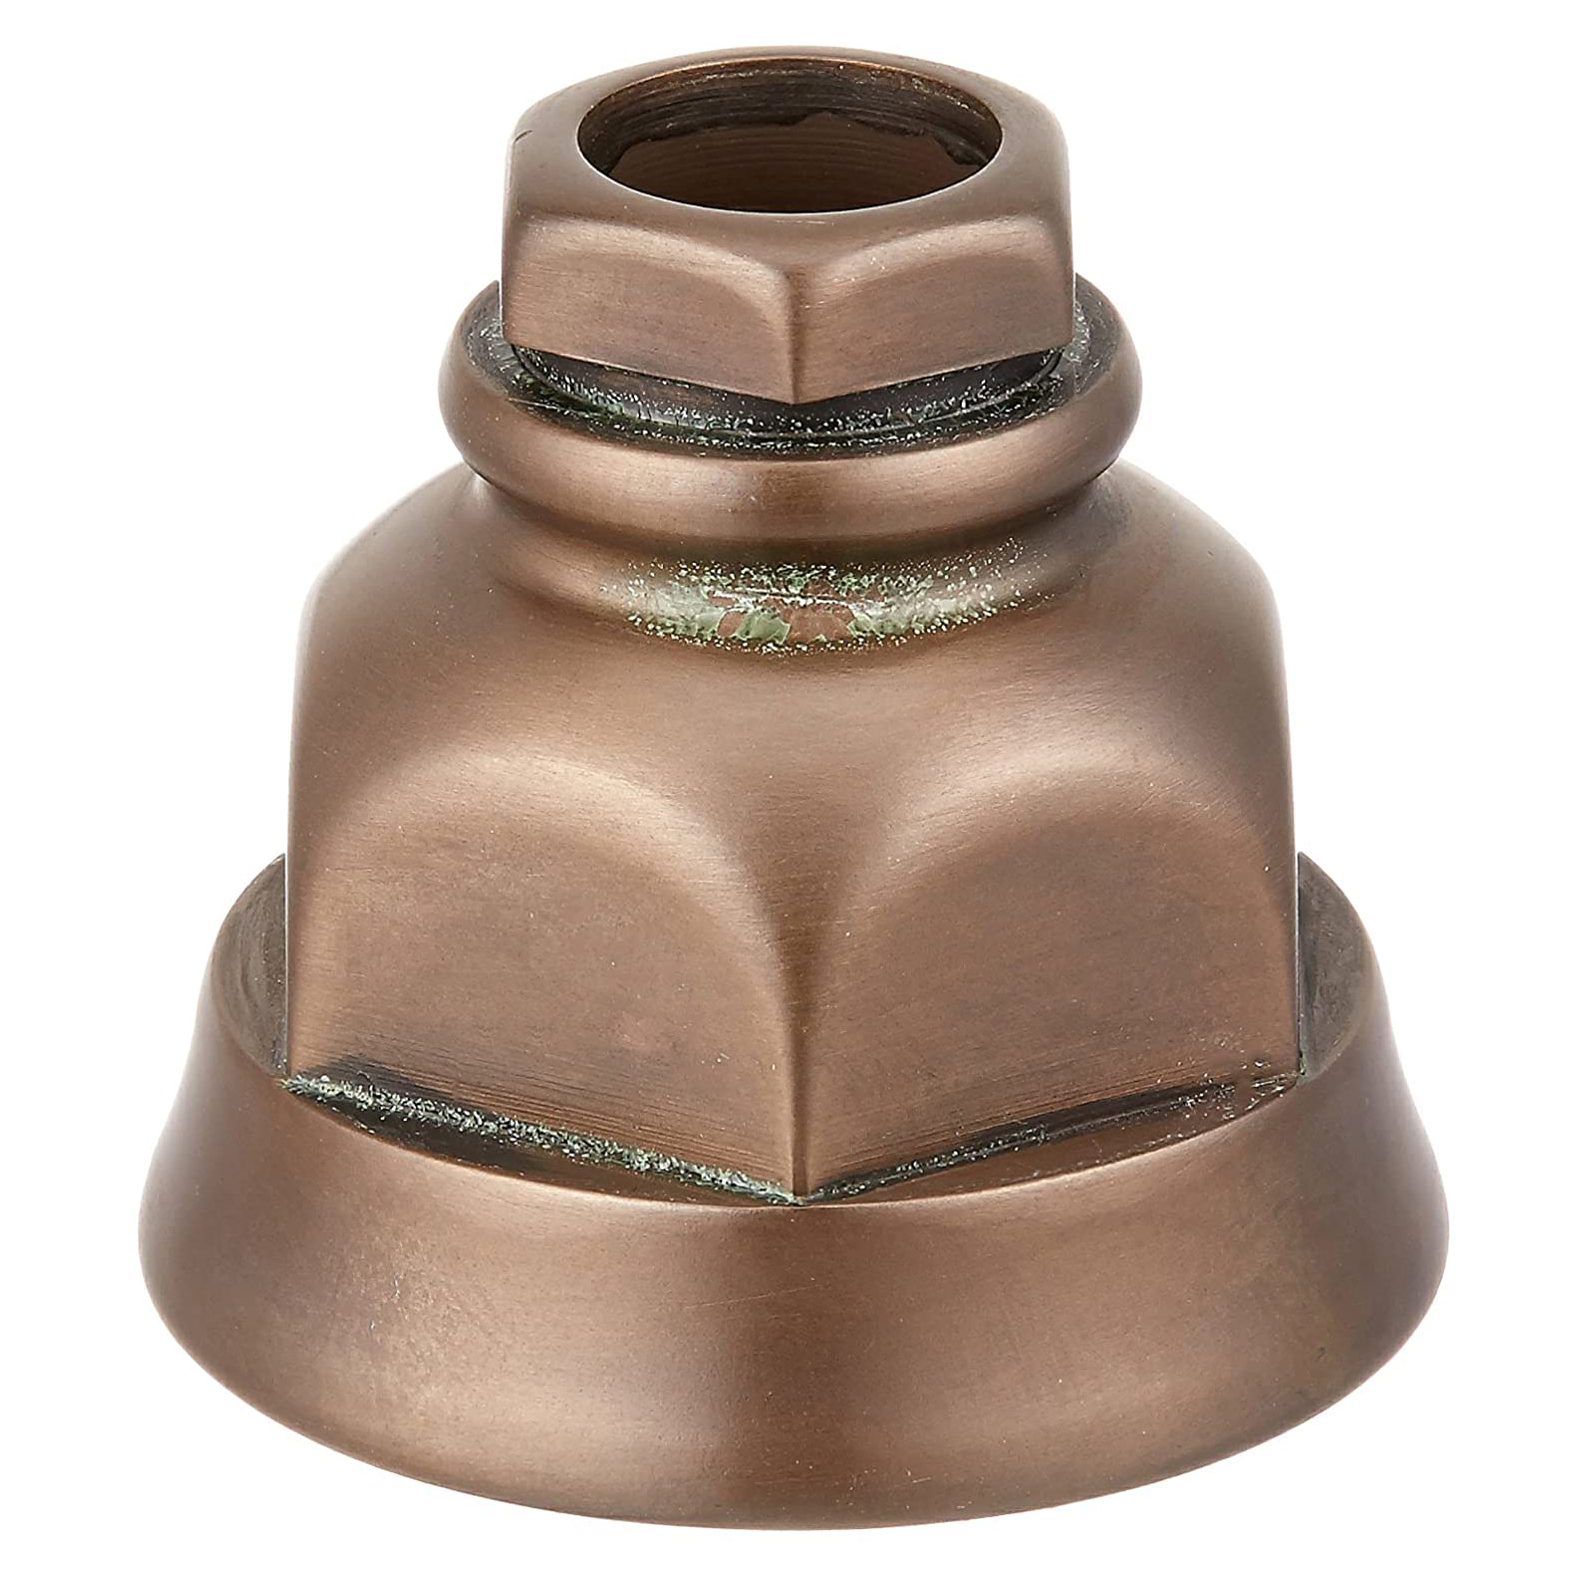 Country Bath Bell Housing for 3/4" Tub Fillers in English Bronze